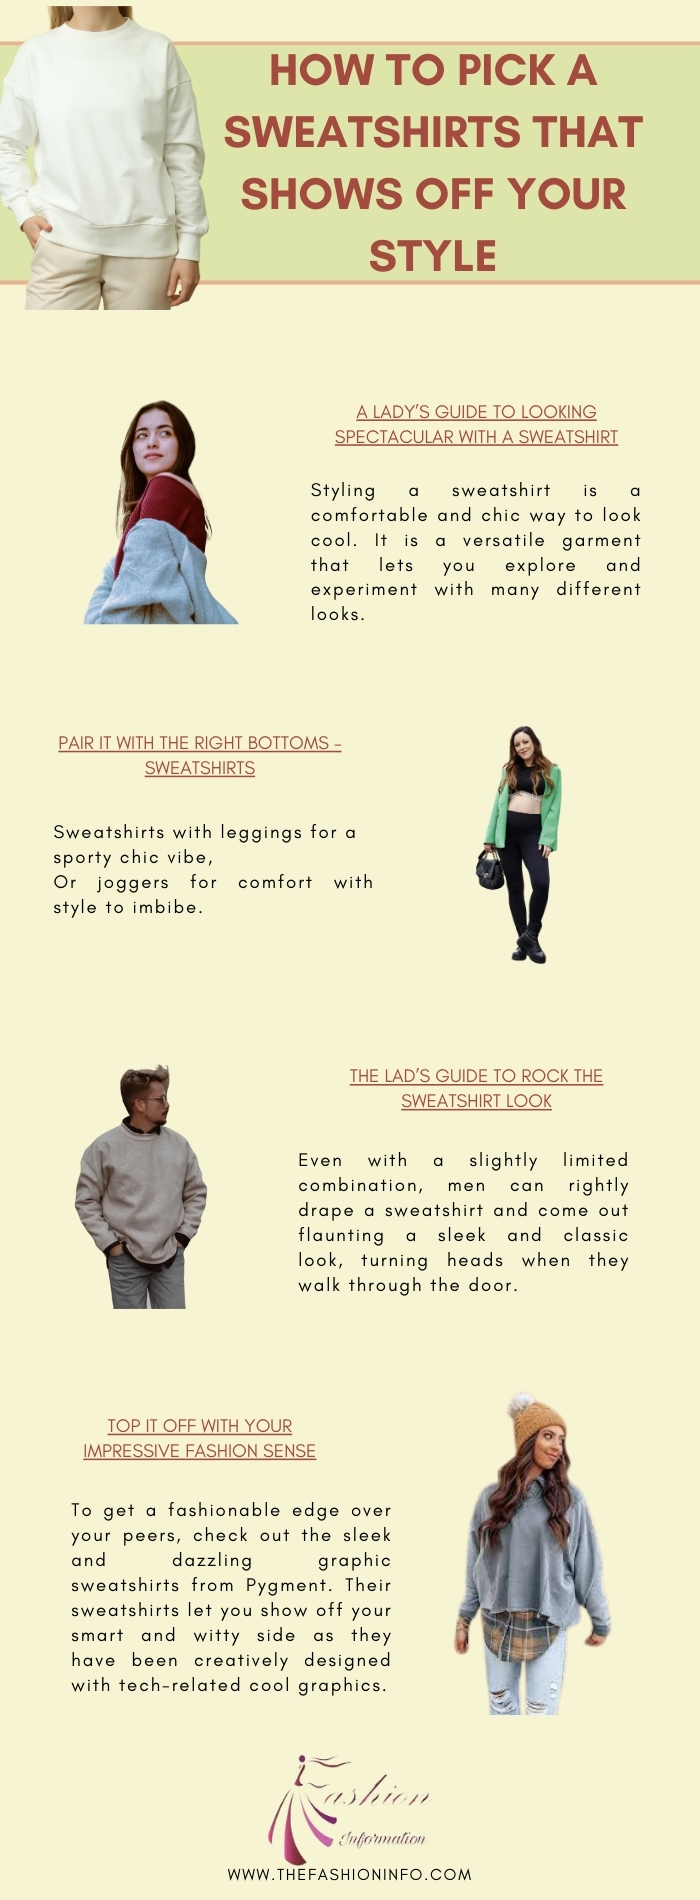 How to pick a sweatshirts that shows off your style